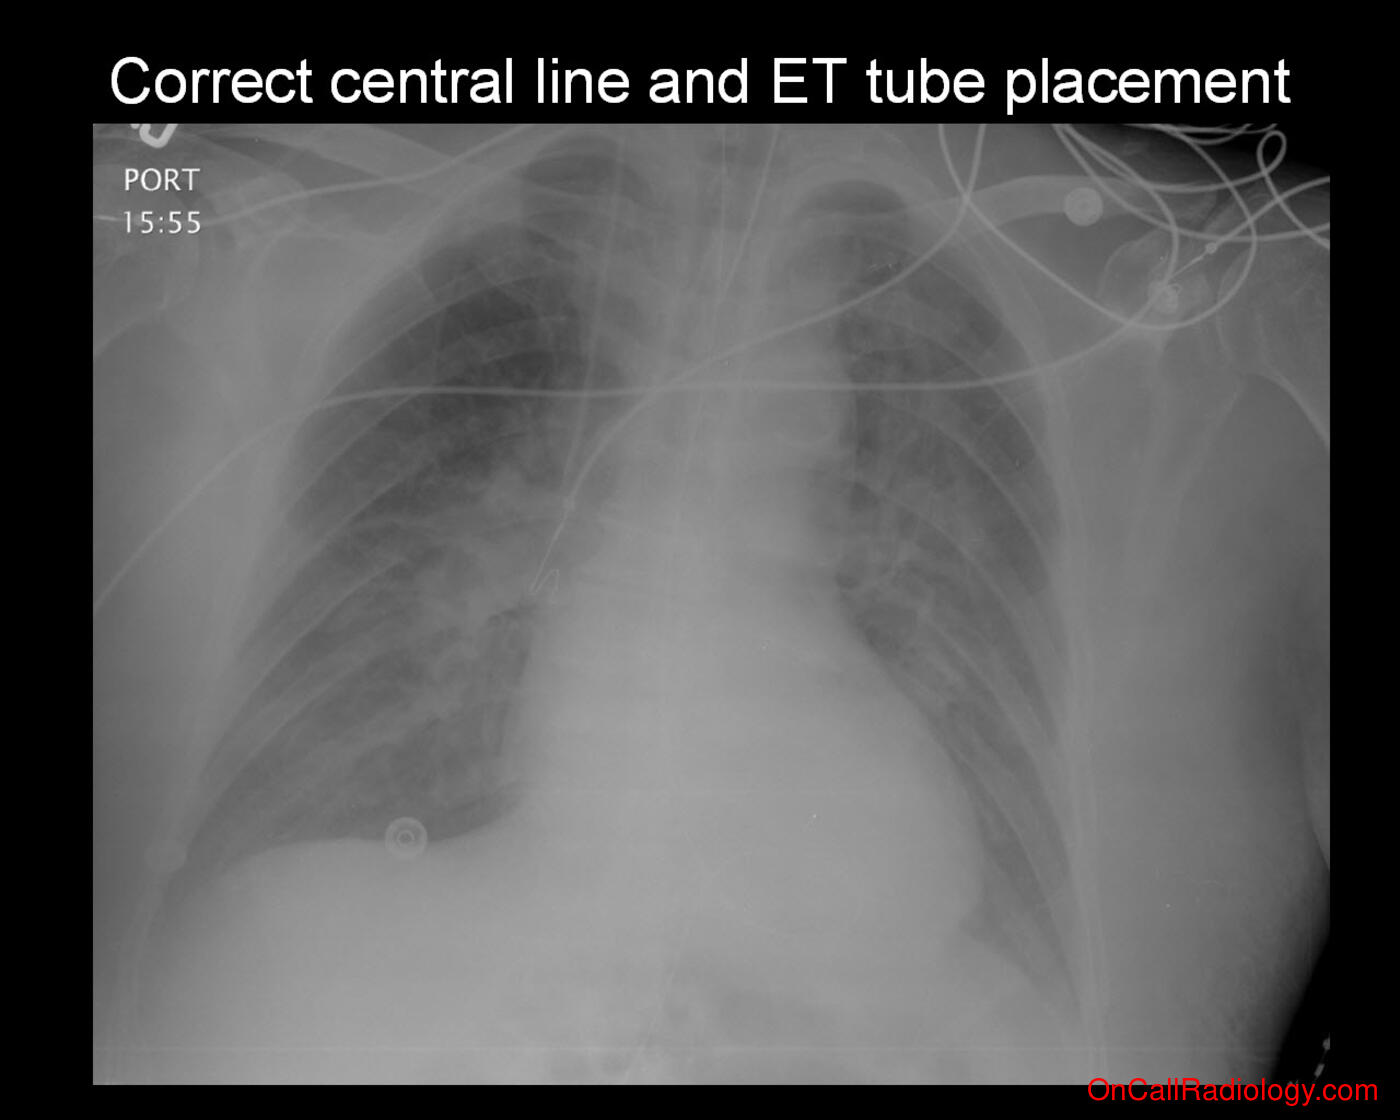 Tube and line misplacement (Endotracheal tube and central line placement - Plain film, Radiograph)